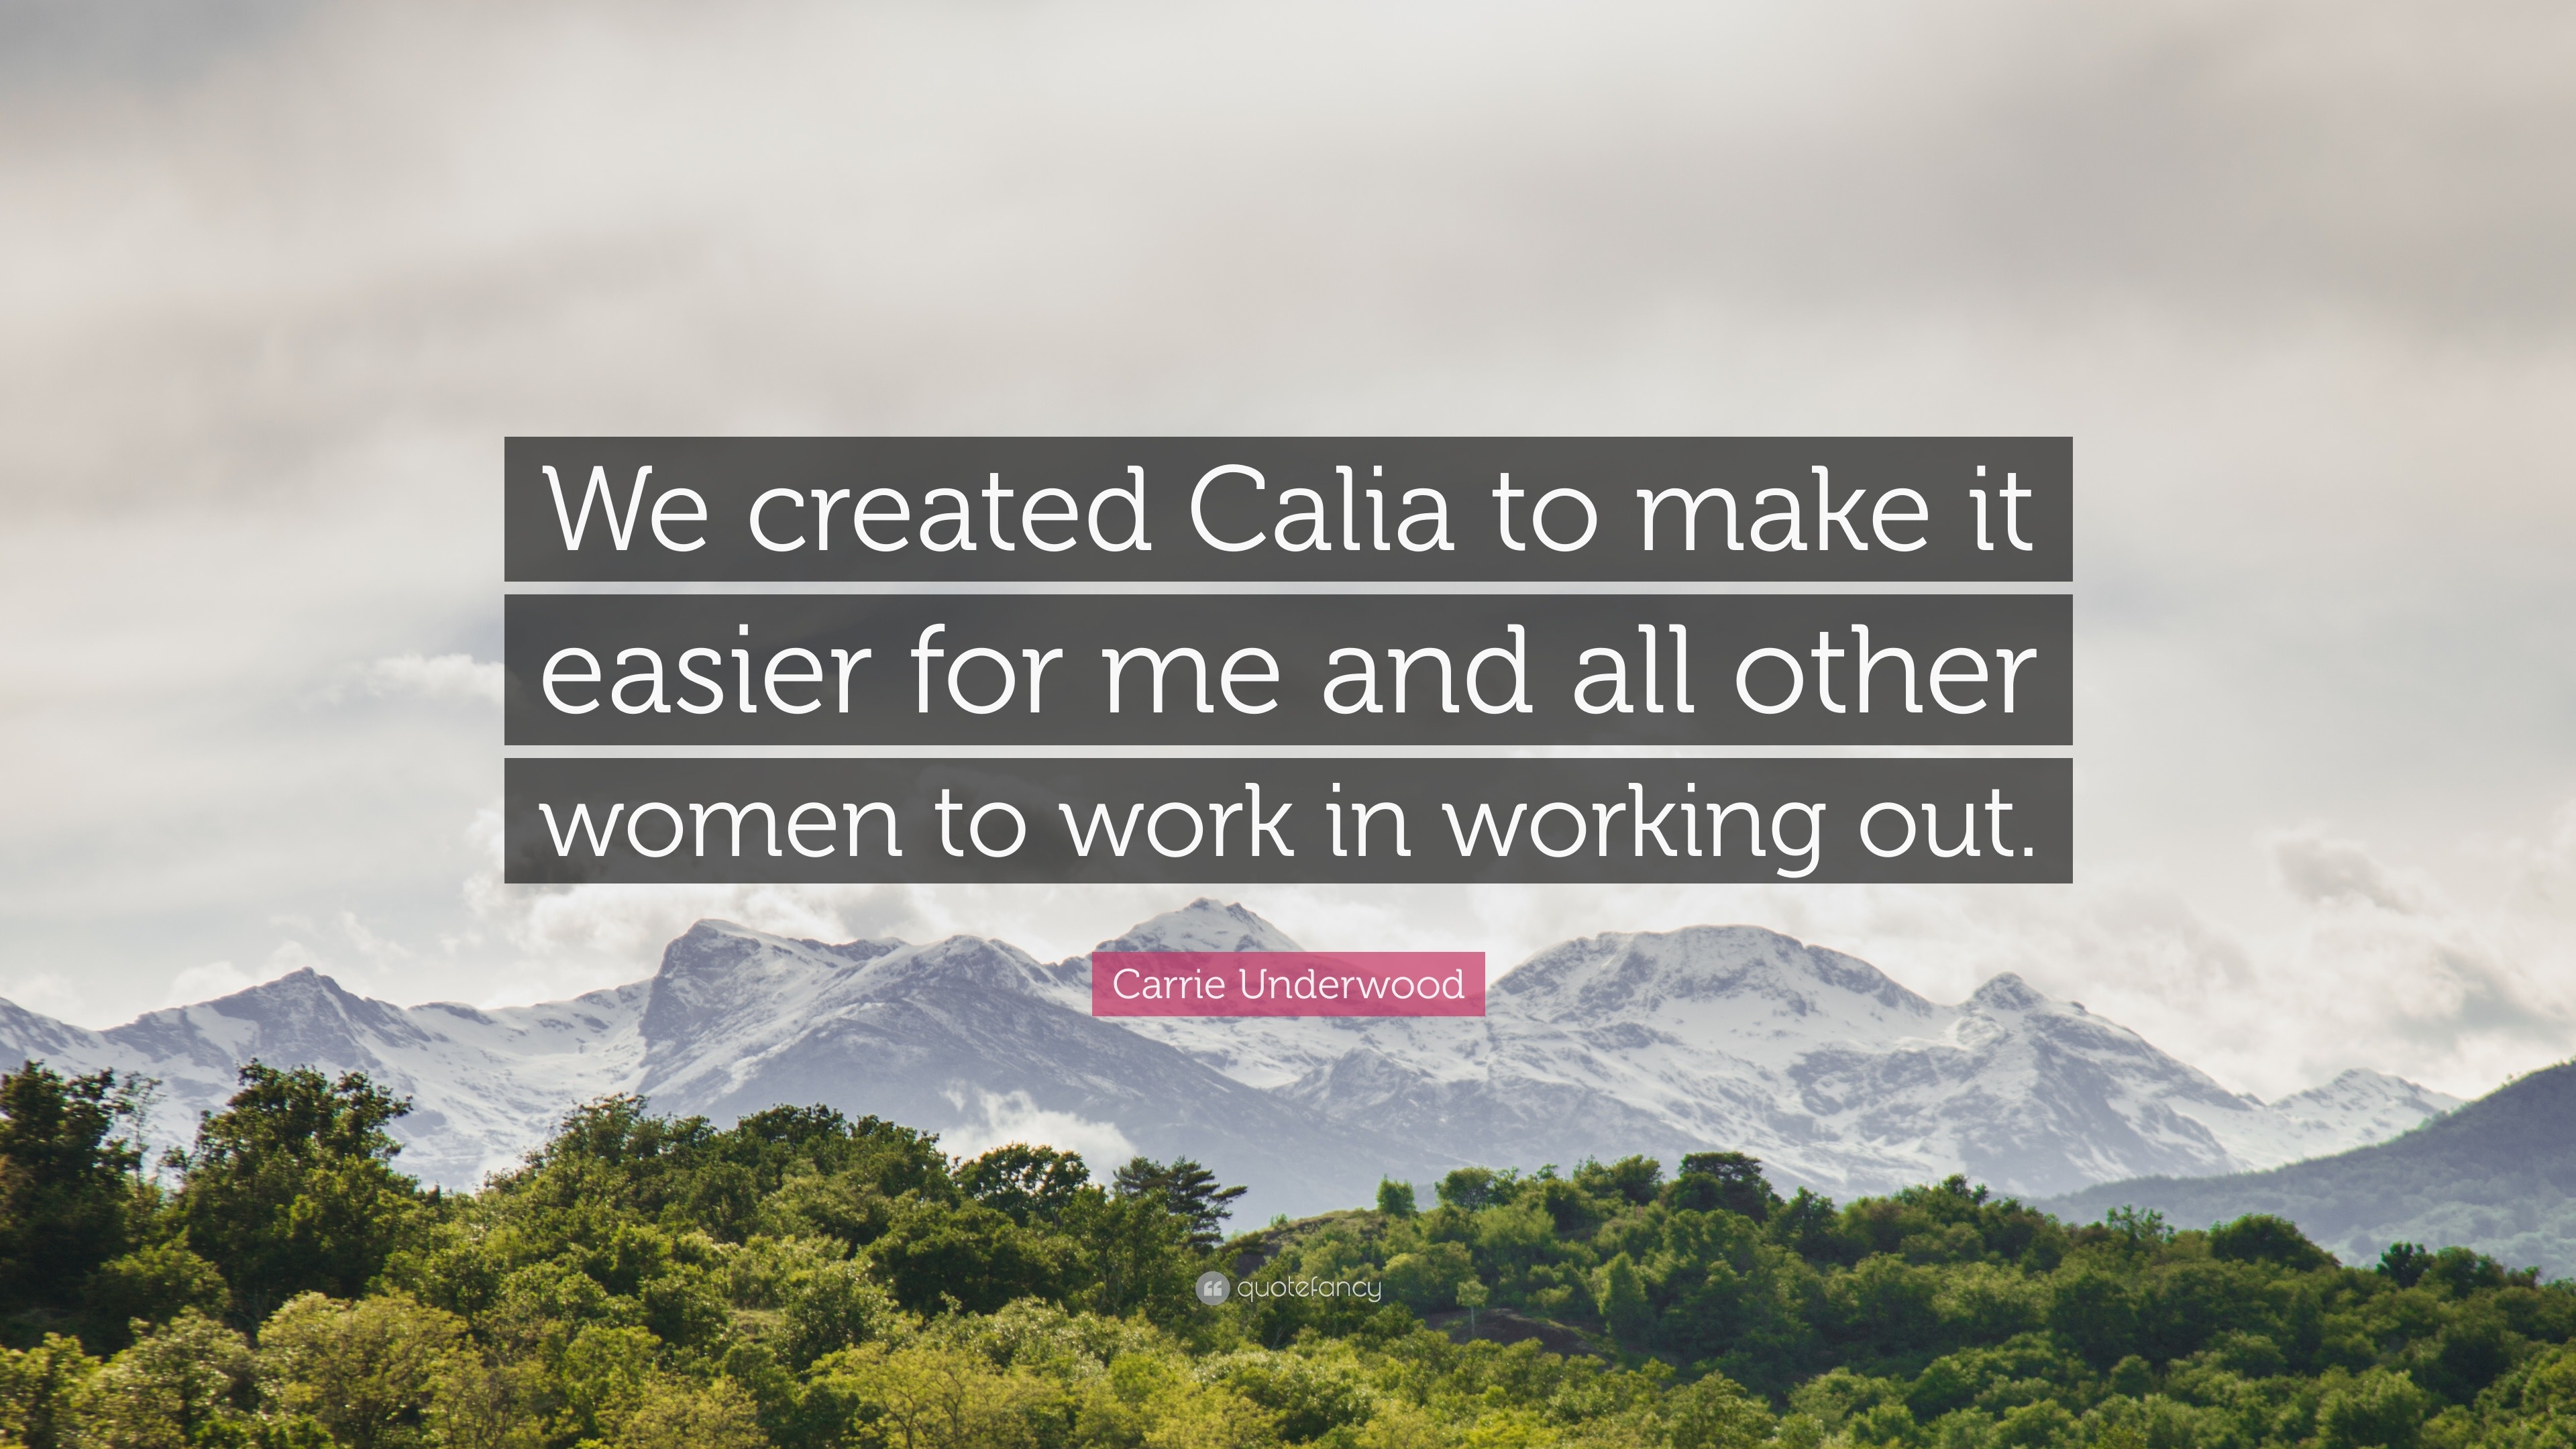 Carrie Underwood Quote: “We created Calia to make it easier for me and all  other women